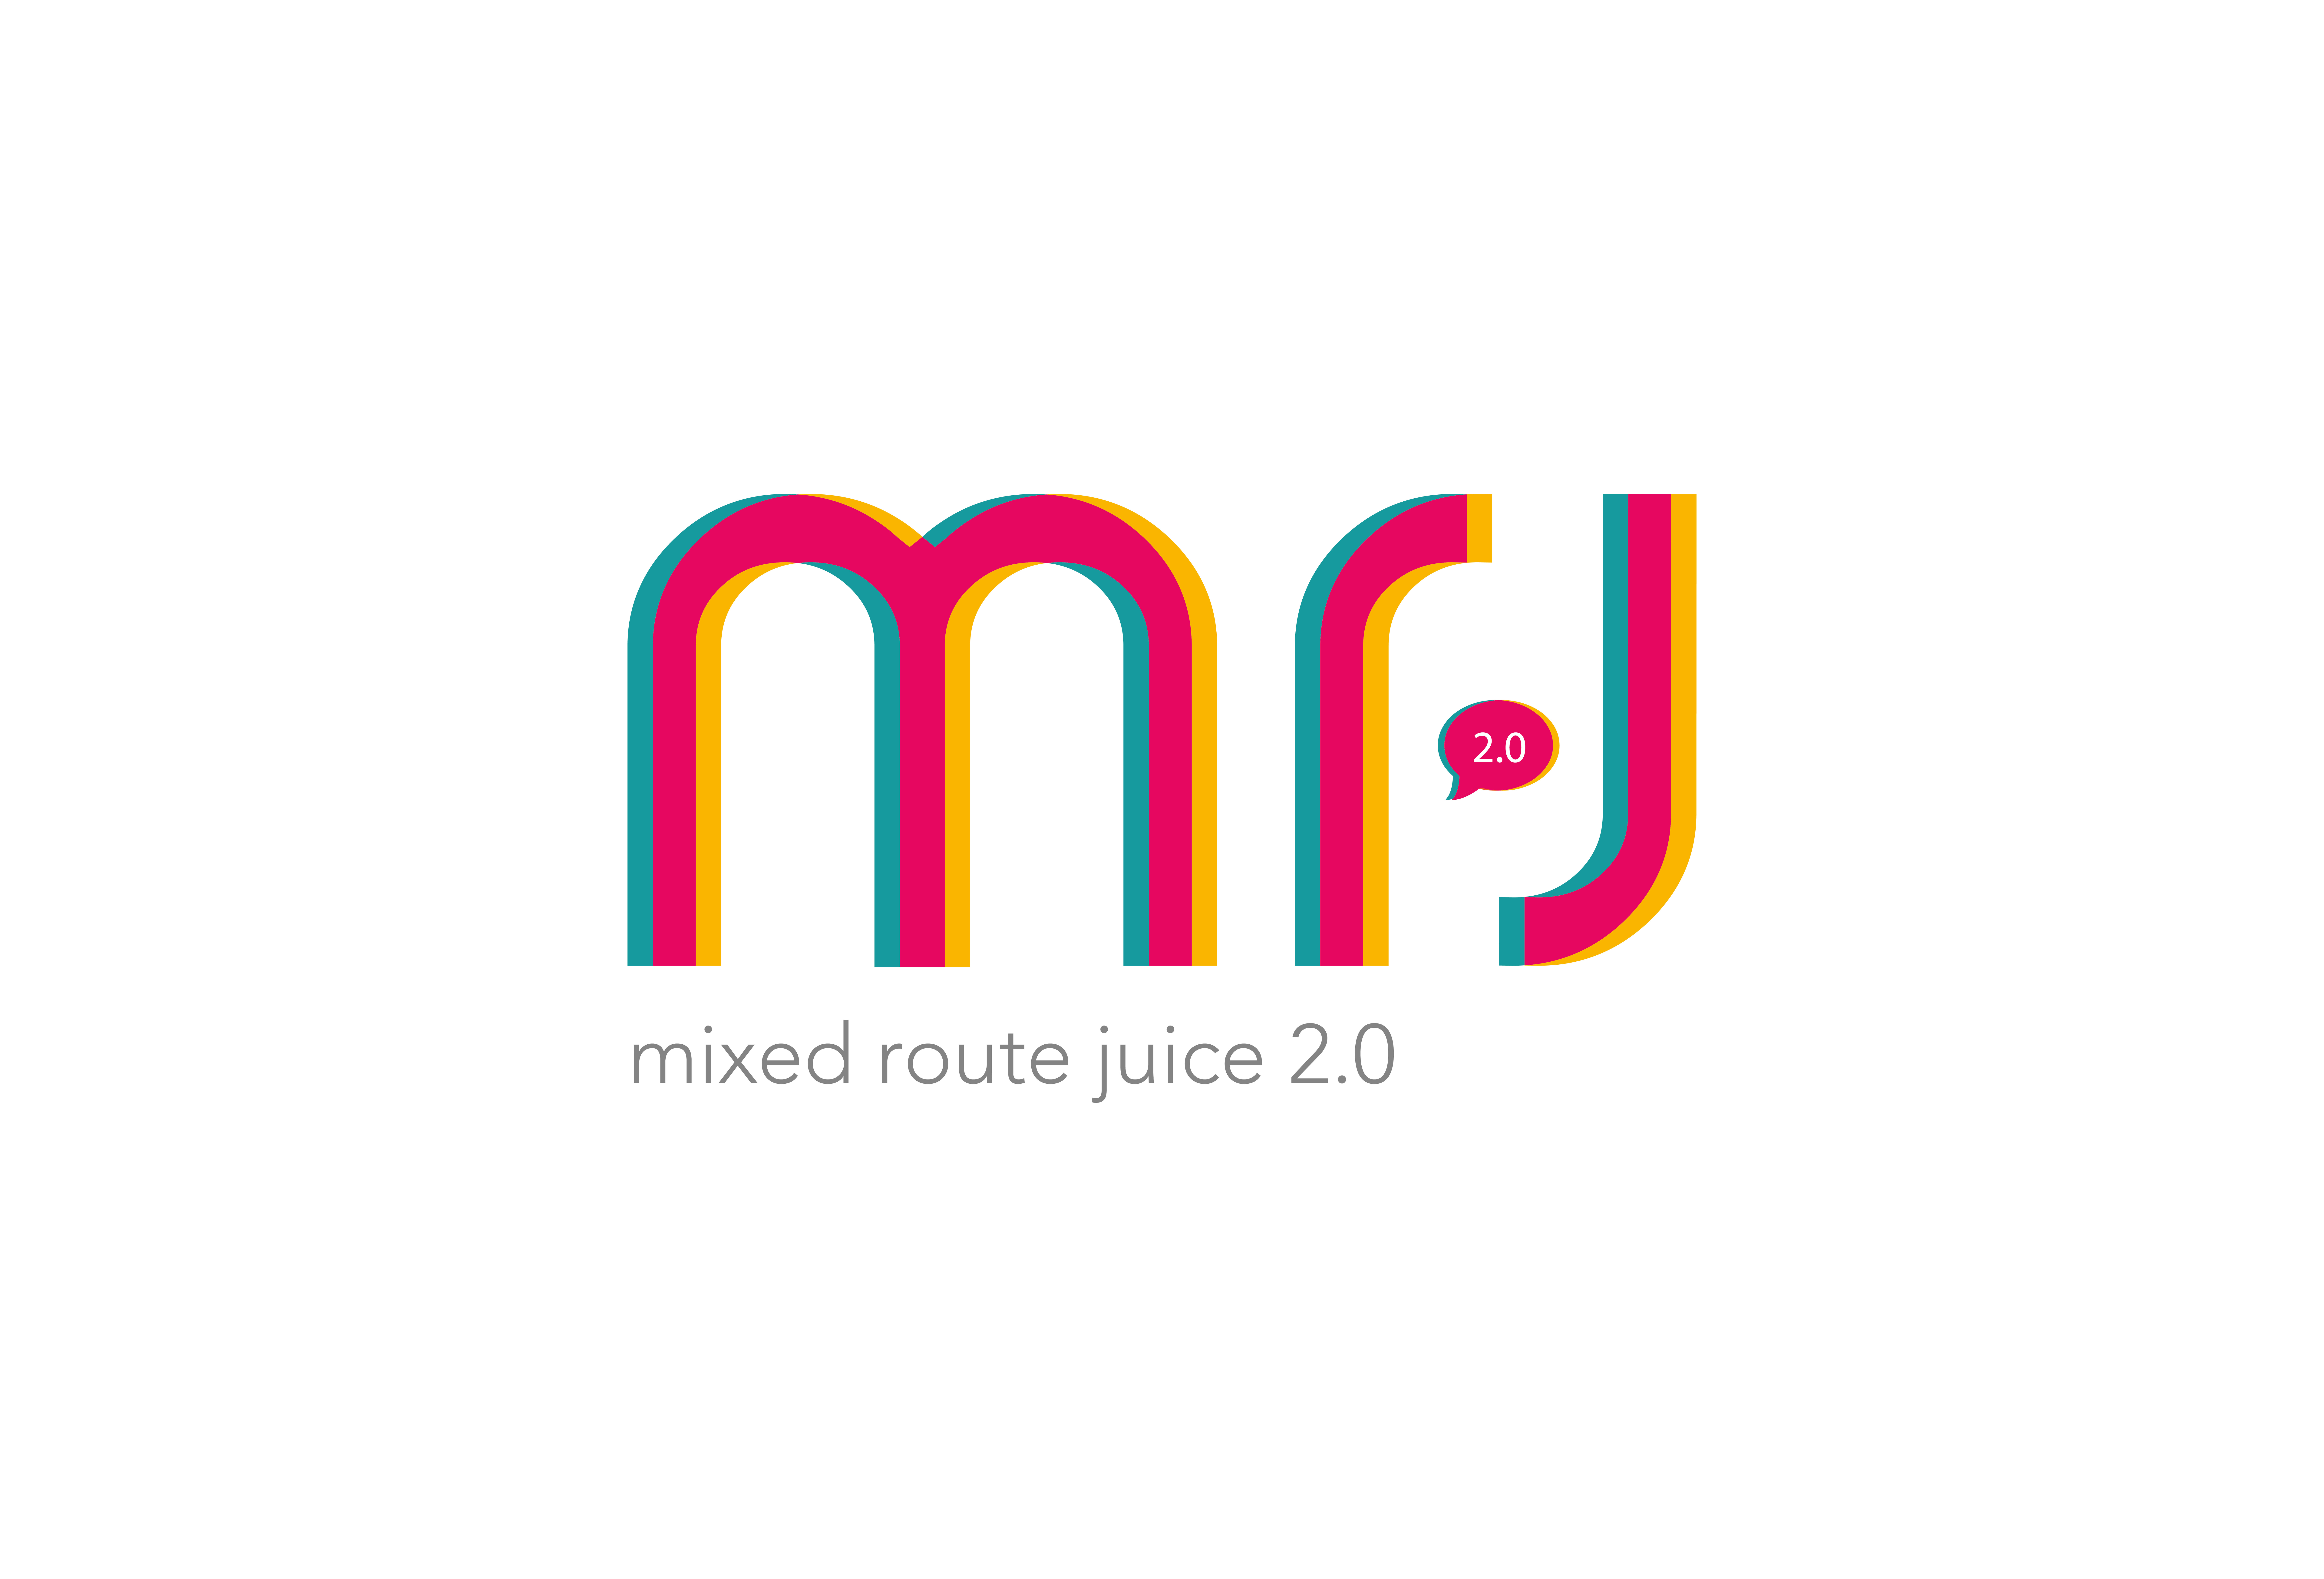 Mixed Route Juice bags the Social and Digital Media Mandate for Stellar Concepts’ sub brands Chili’s Grill & Bar® and Paul India